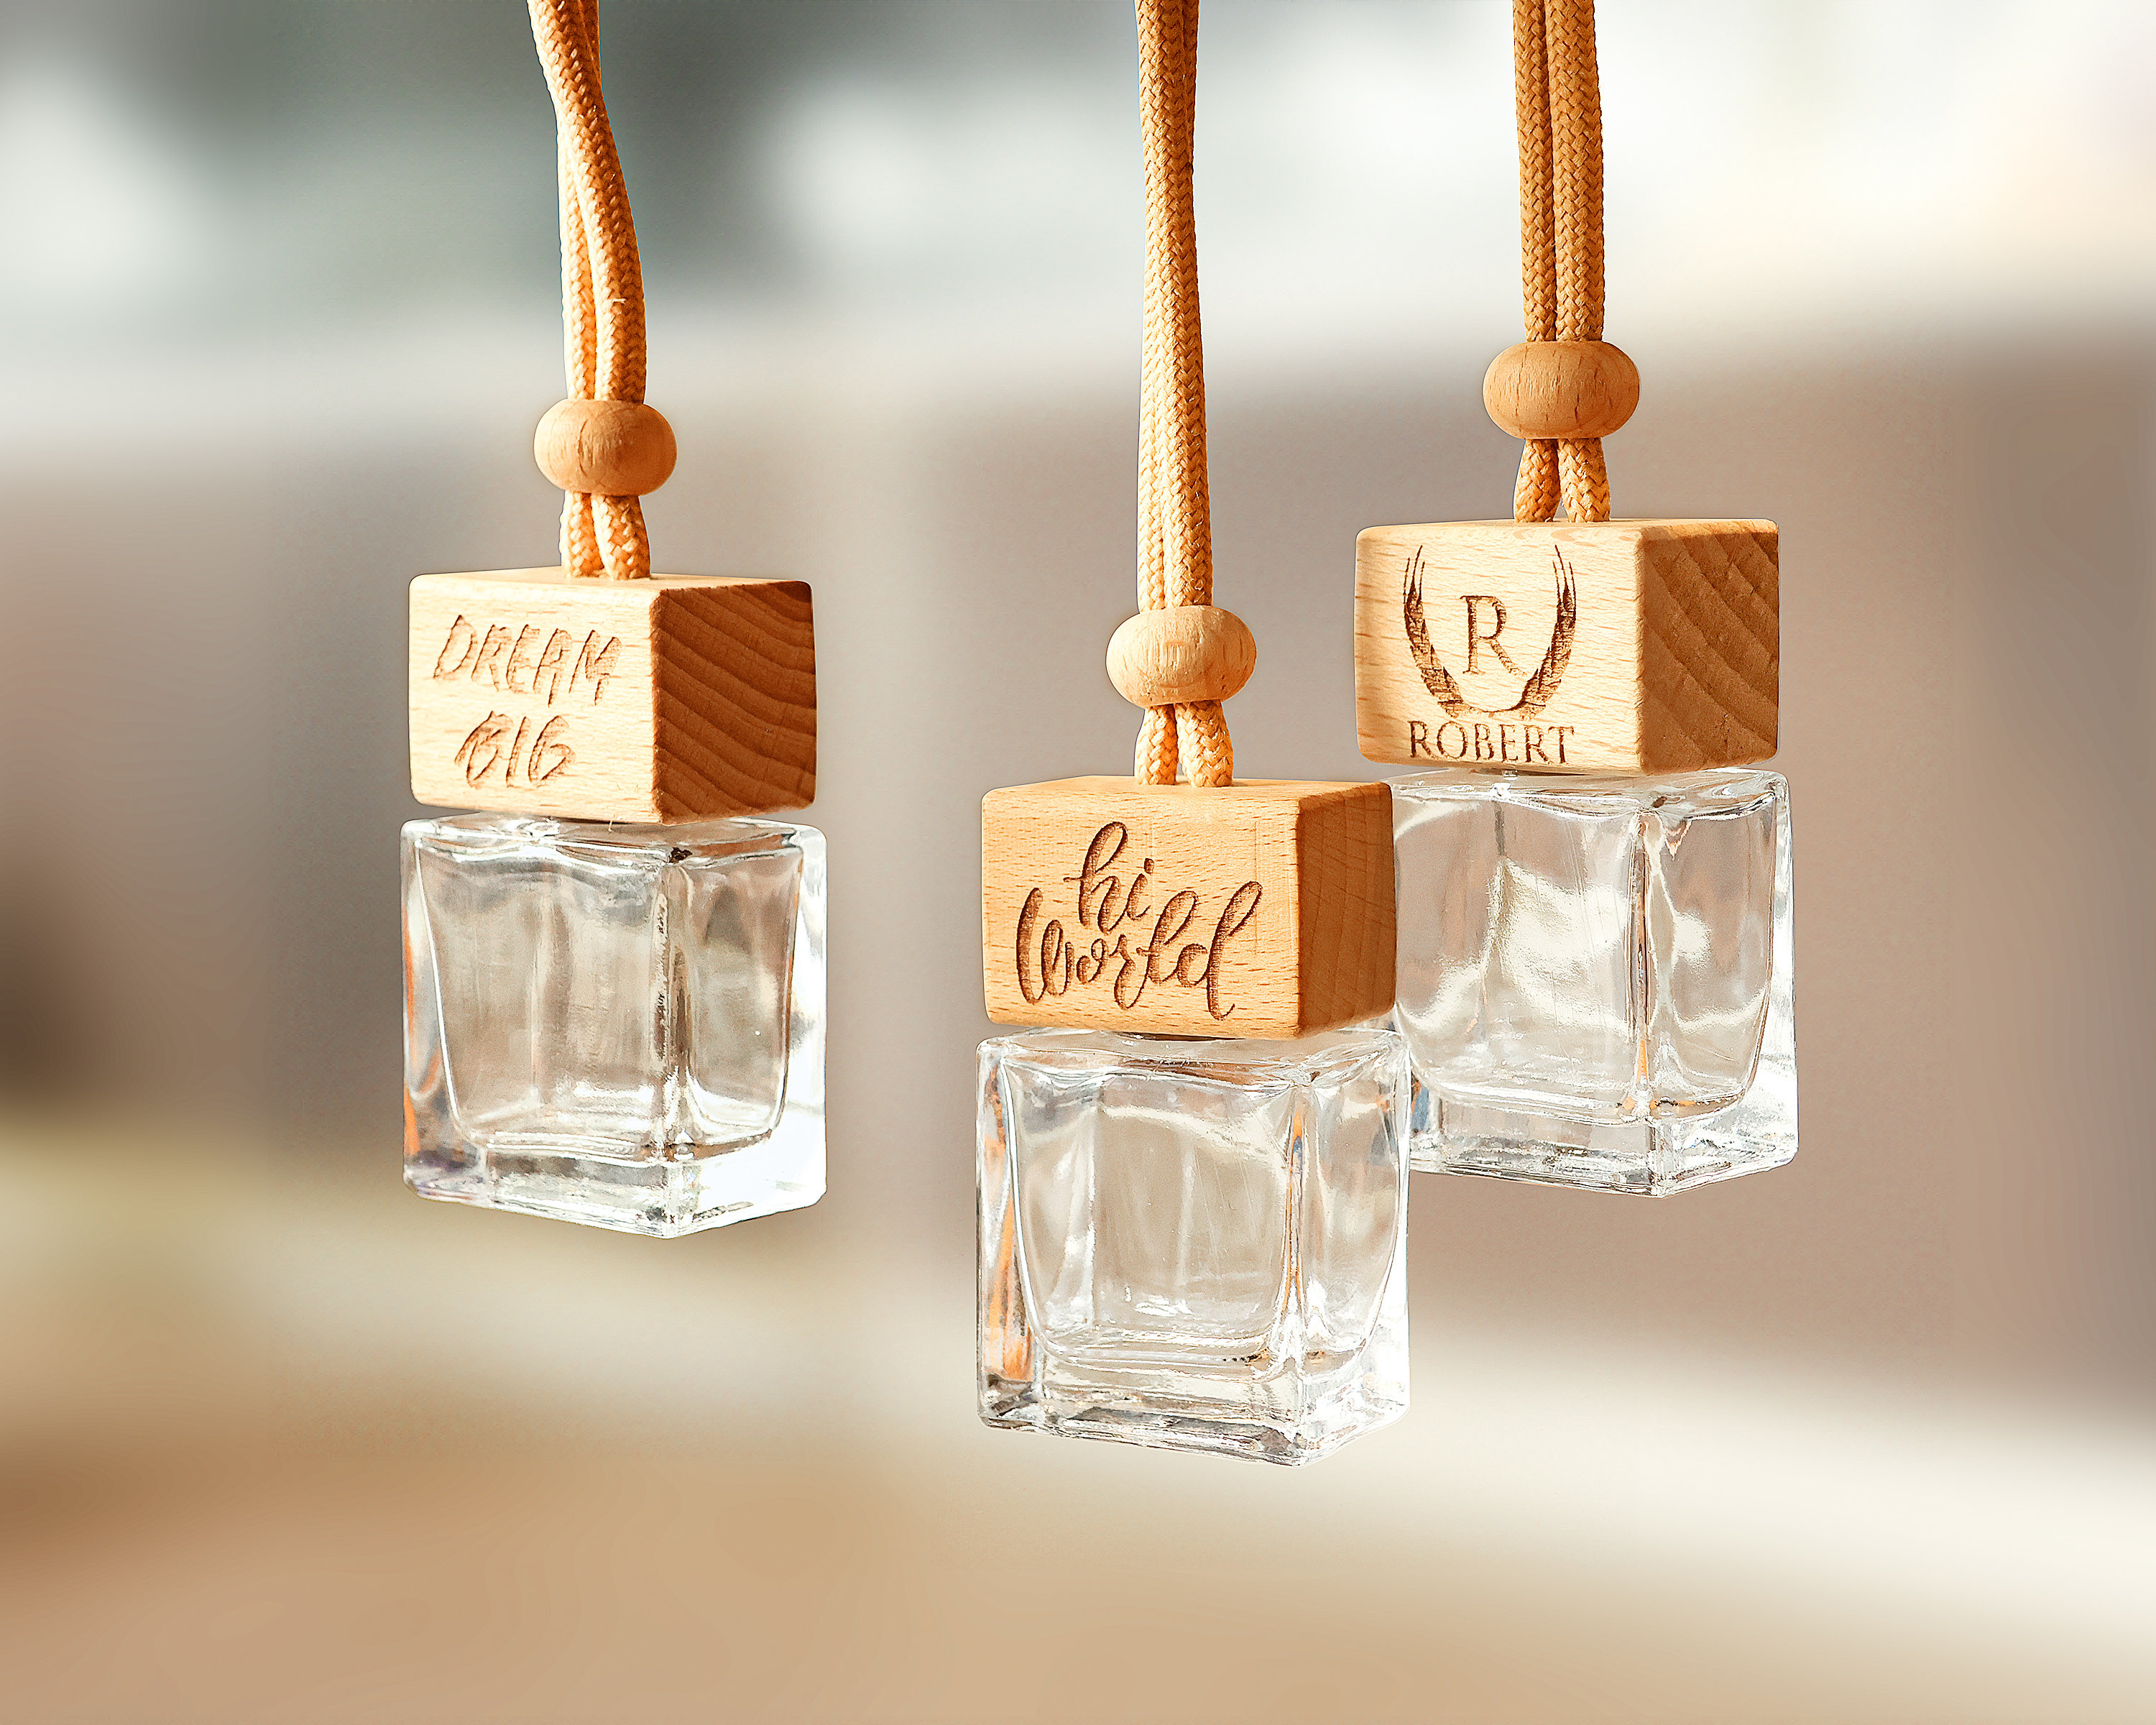 Hanging Car Perfume Bottle Pendant with Wooden Cap - China Car